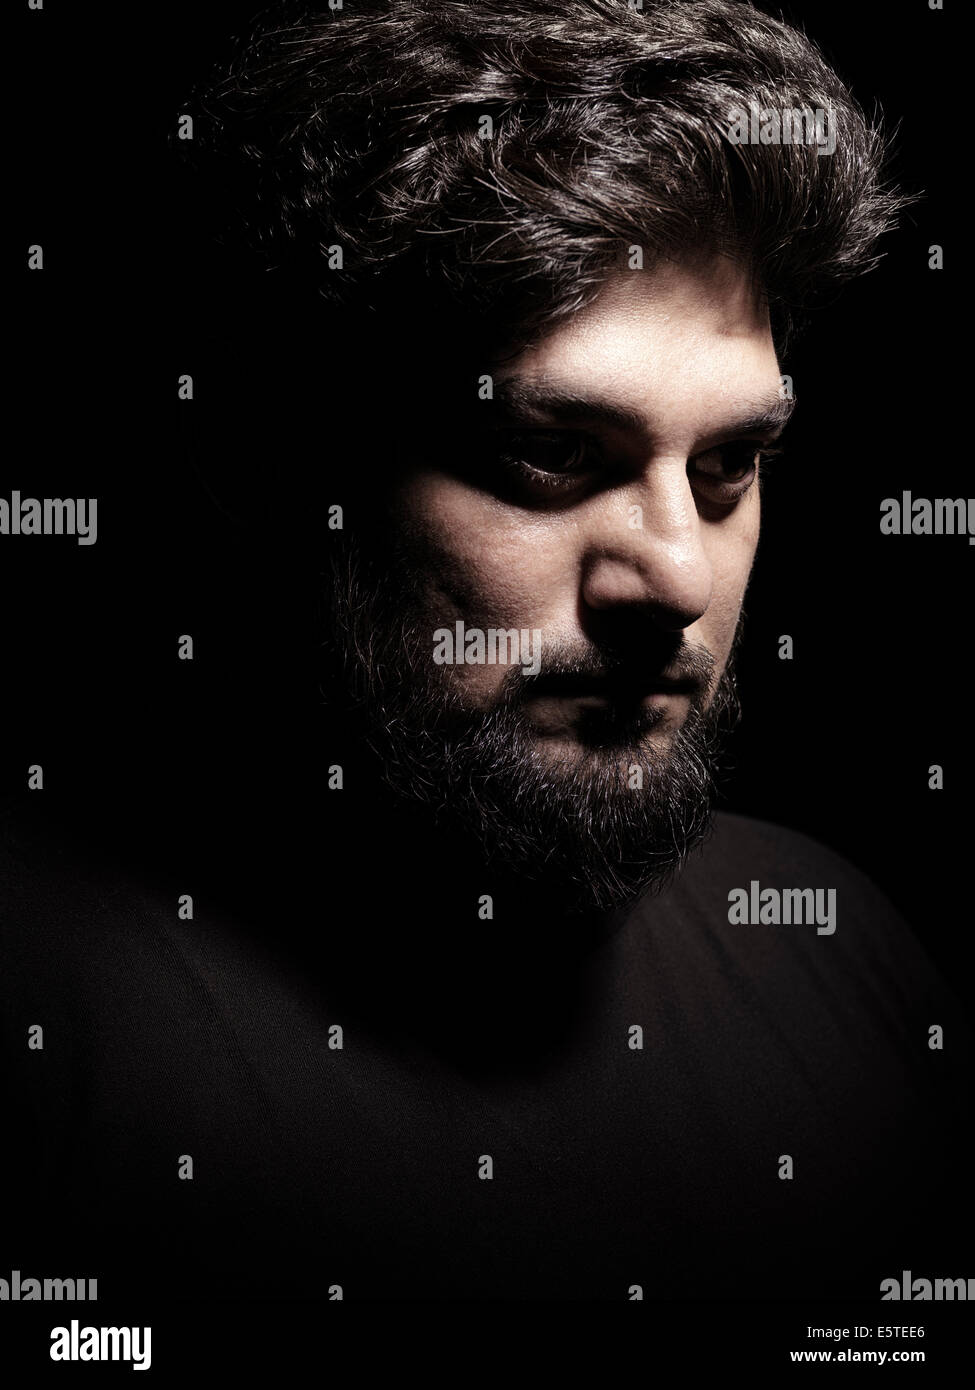 License available at MaximImages.com - Dramatic expressive portrait of a thoughtful Middle eastern man with strong shadows isolated on black backgroun Stock Photo